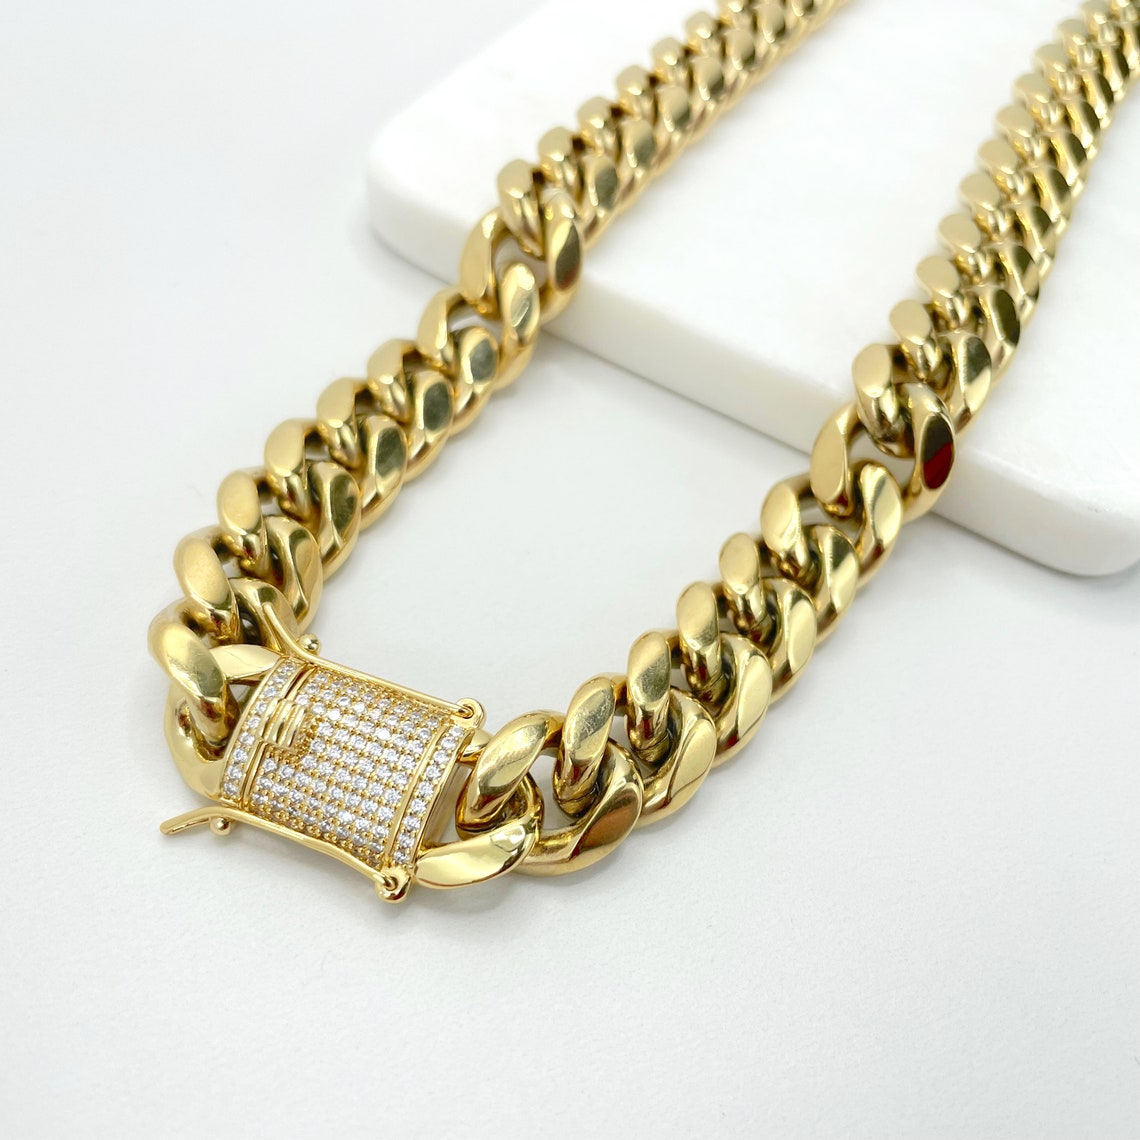 Wholesale Cuban Link Chain Jewelry necklace,6 Pieces